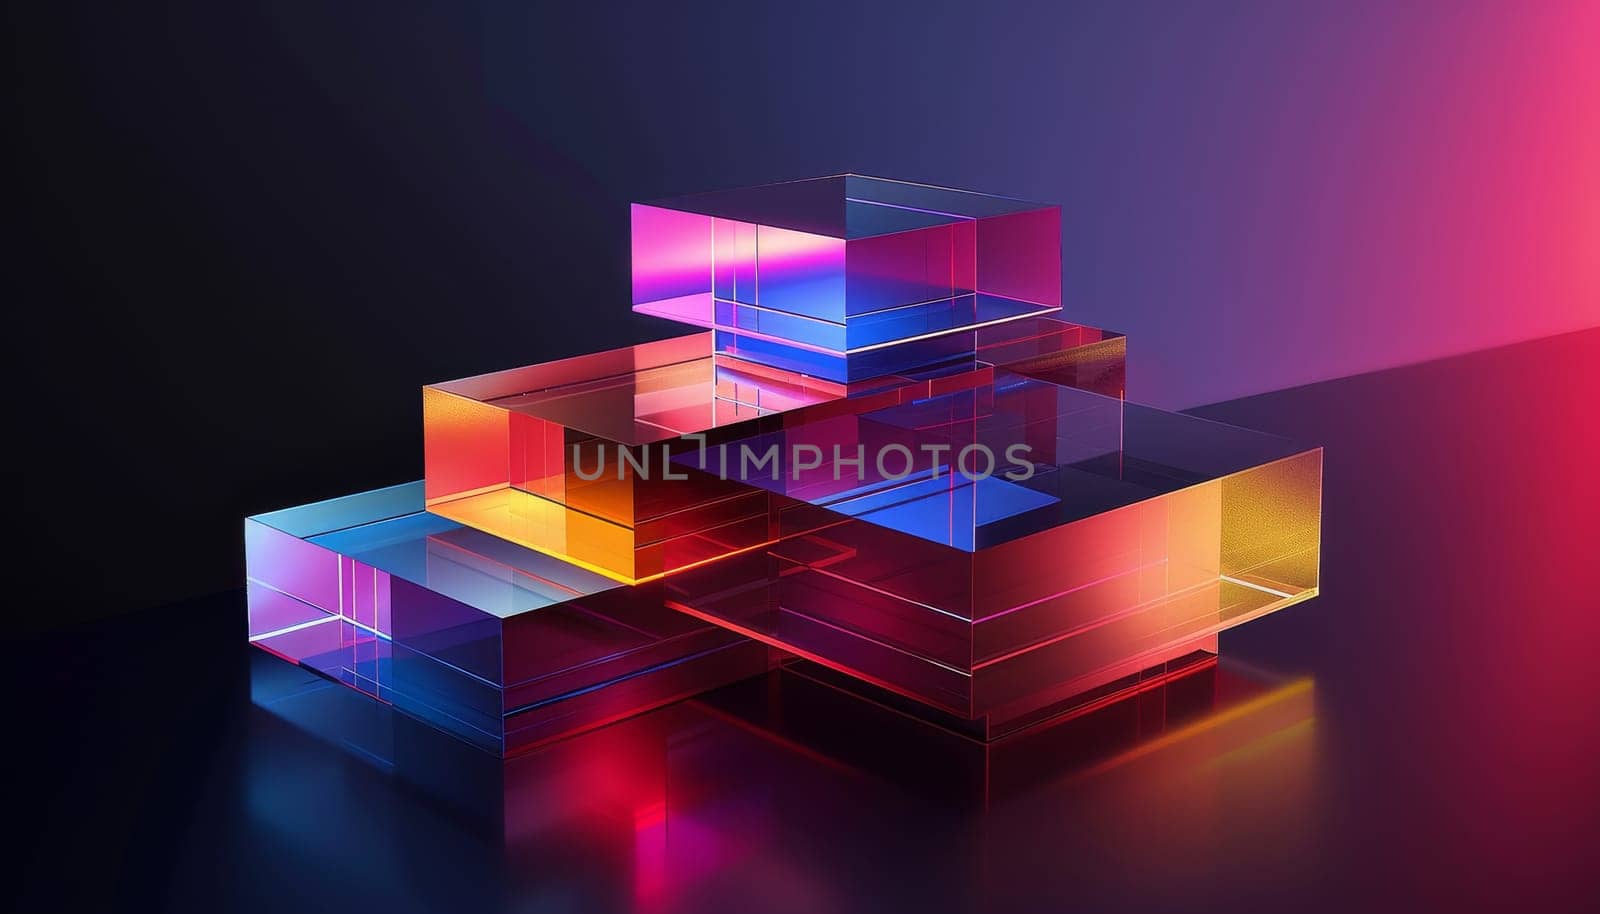 A stack of colorful cubes made of clear plastic by AI generated image.